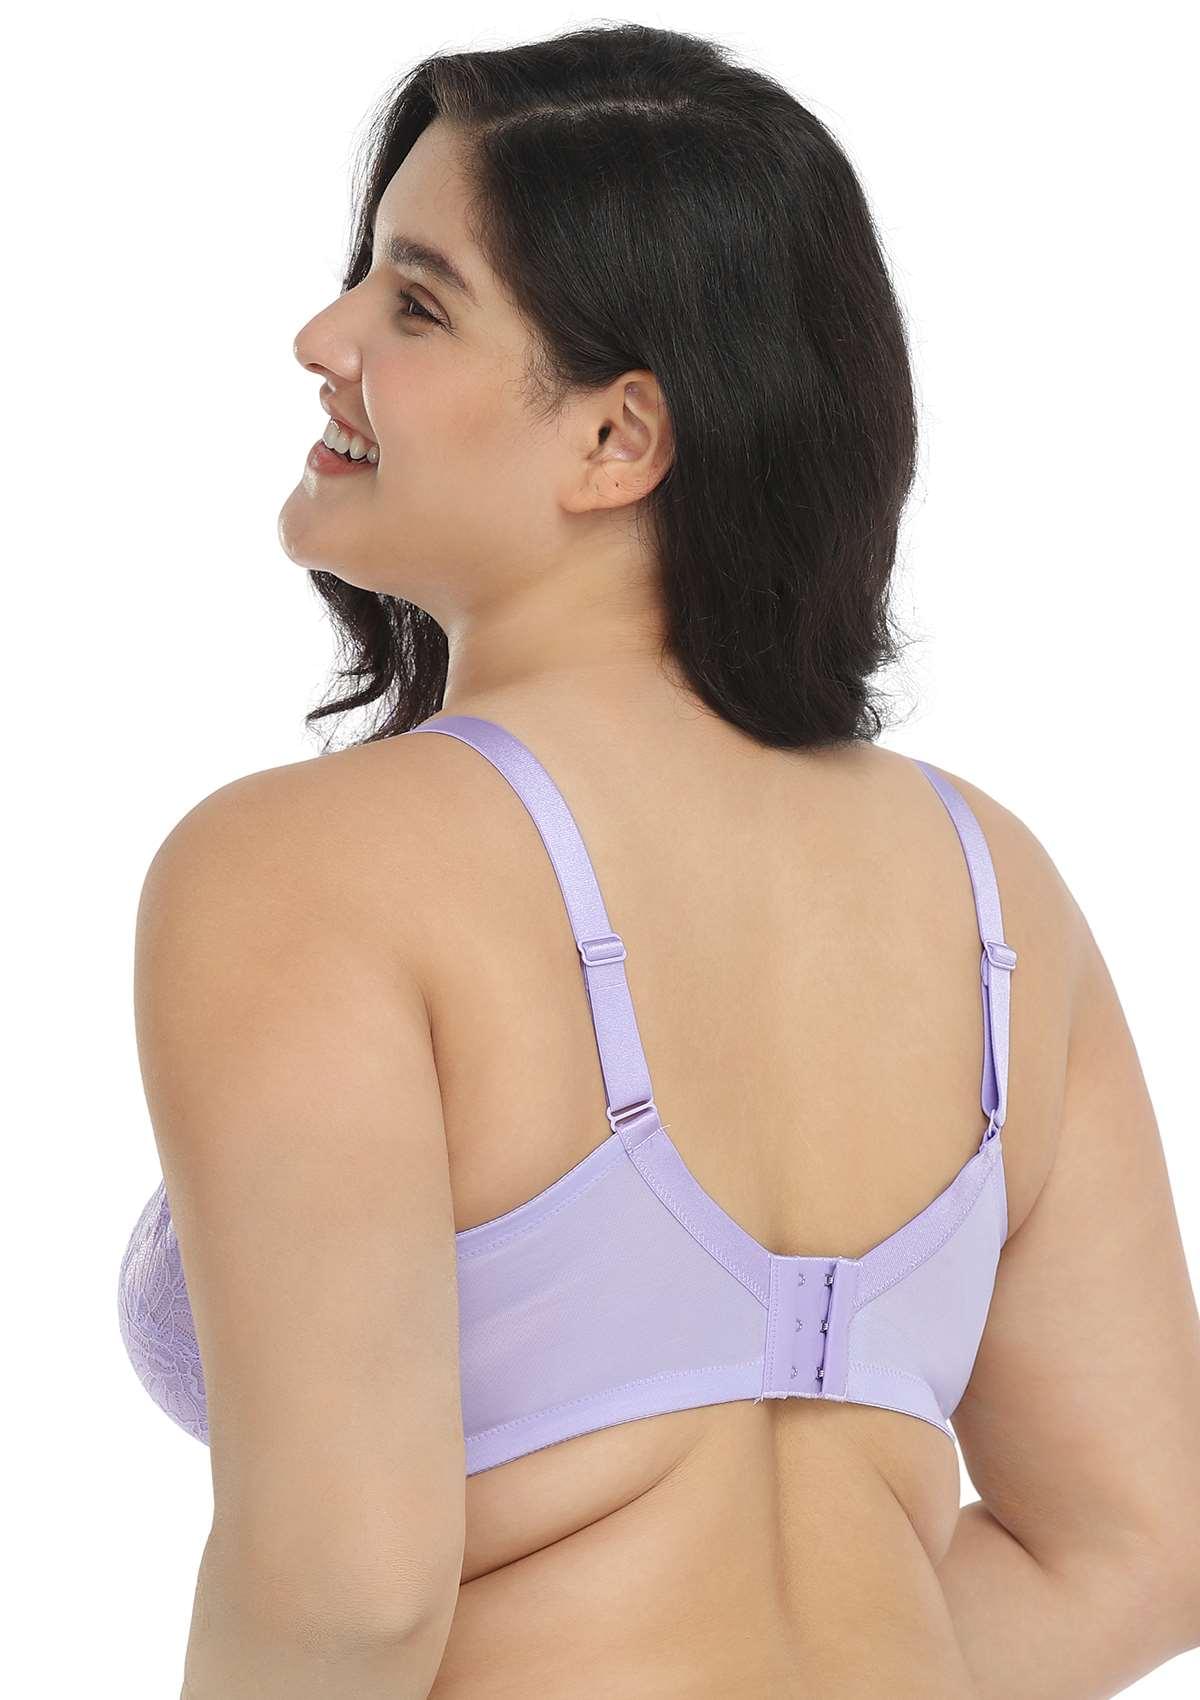 HSIA Blossom Transparent Lace Bra: Plus Size Wired Back Smoothing Bra - Light Purple / 40 / DDD/F